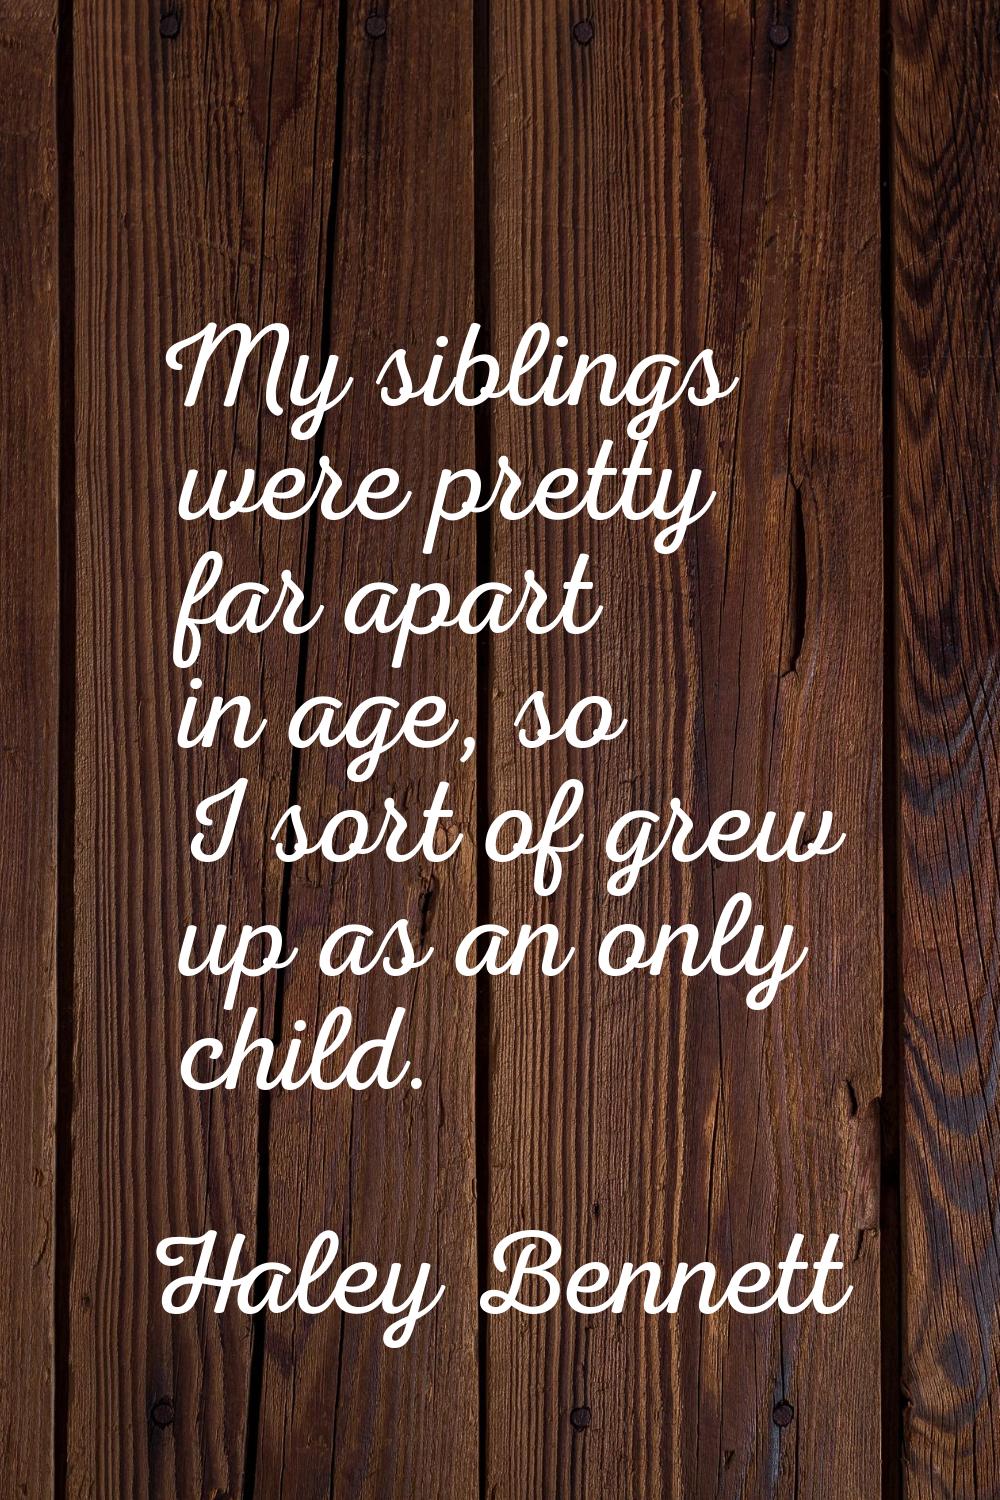 My siblings were pretty far apart in age, so I sort of grew up as an only child.